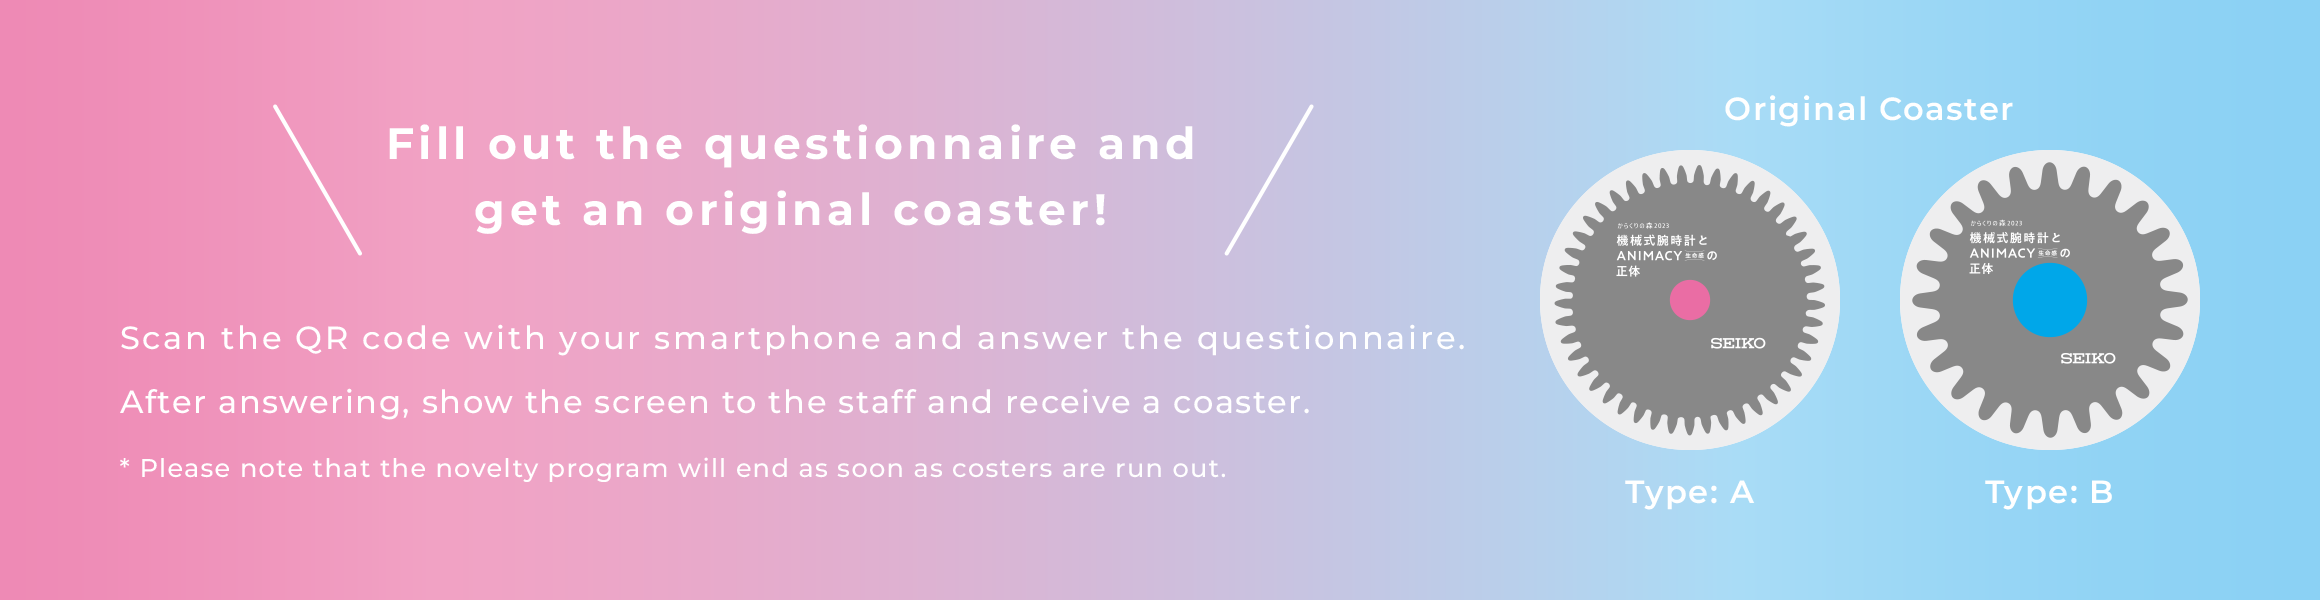 Fill out the questionnaire and get an original coaster!